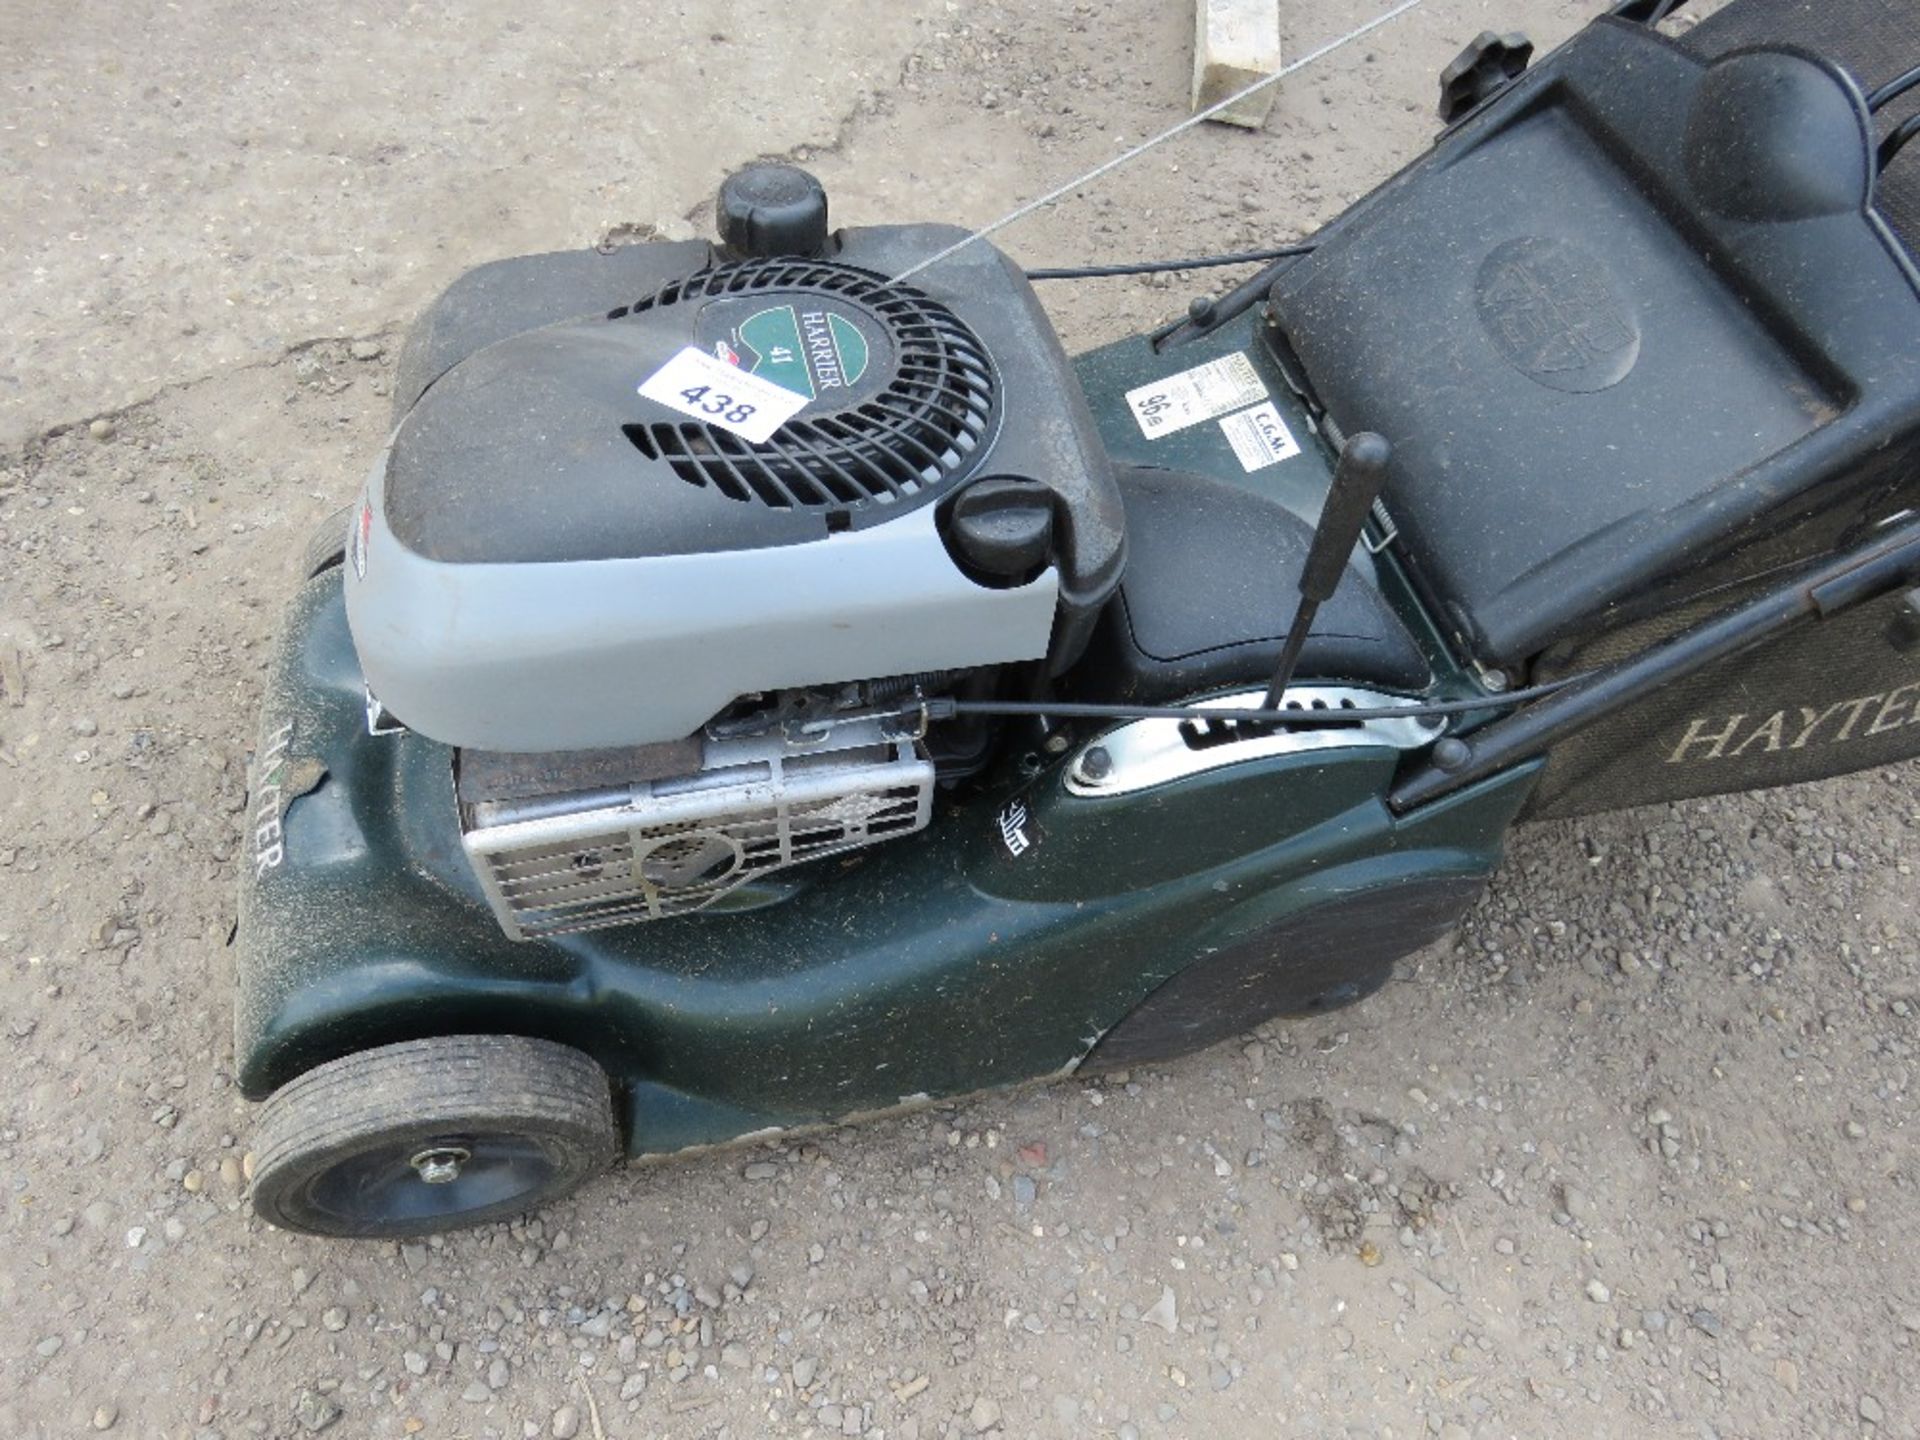 HAYTER HARRIER 41 PETROL ENGINED MOWER WITH REAR ROLLER AND COLLECTOR. ....THIS LOT IS SOLD UNDER TH - Image 2 of 4